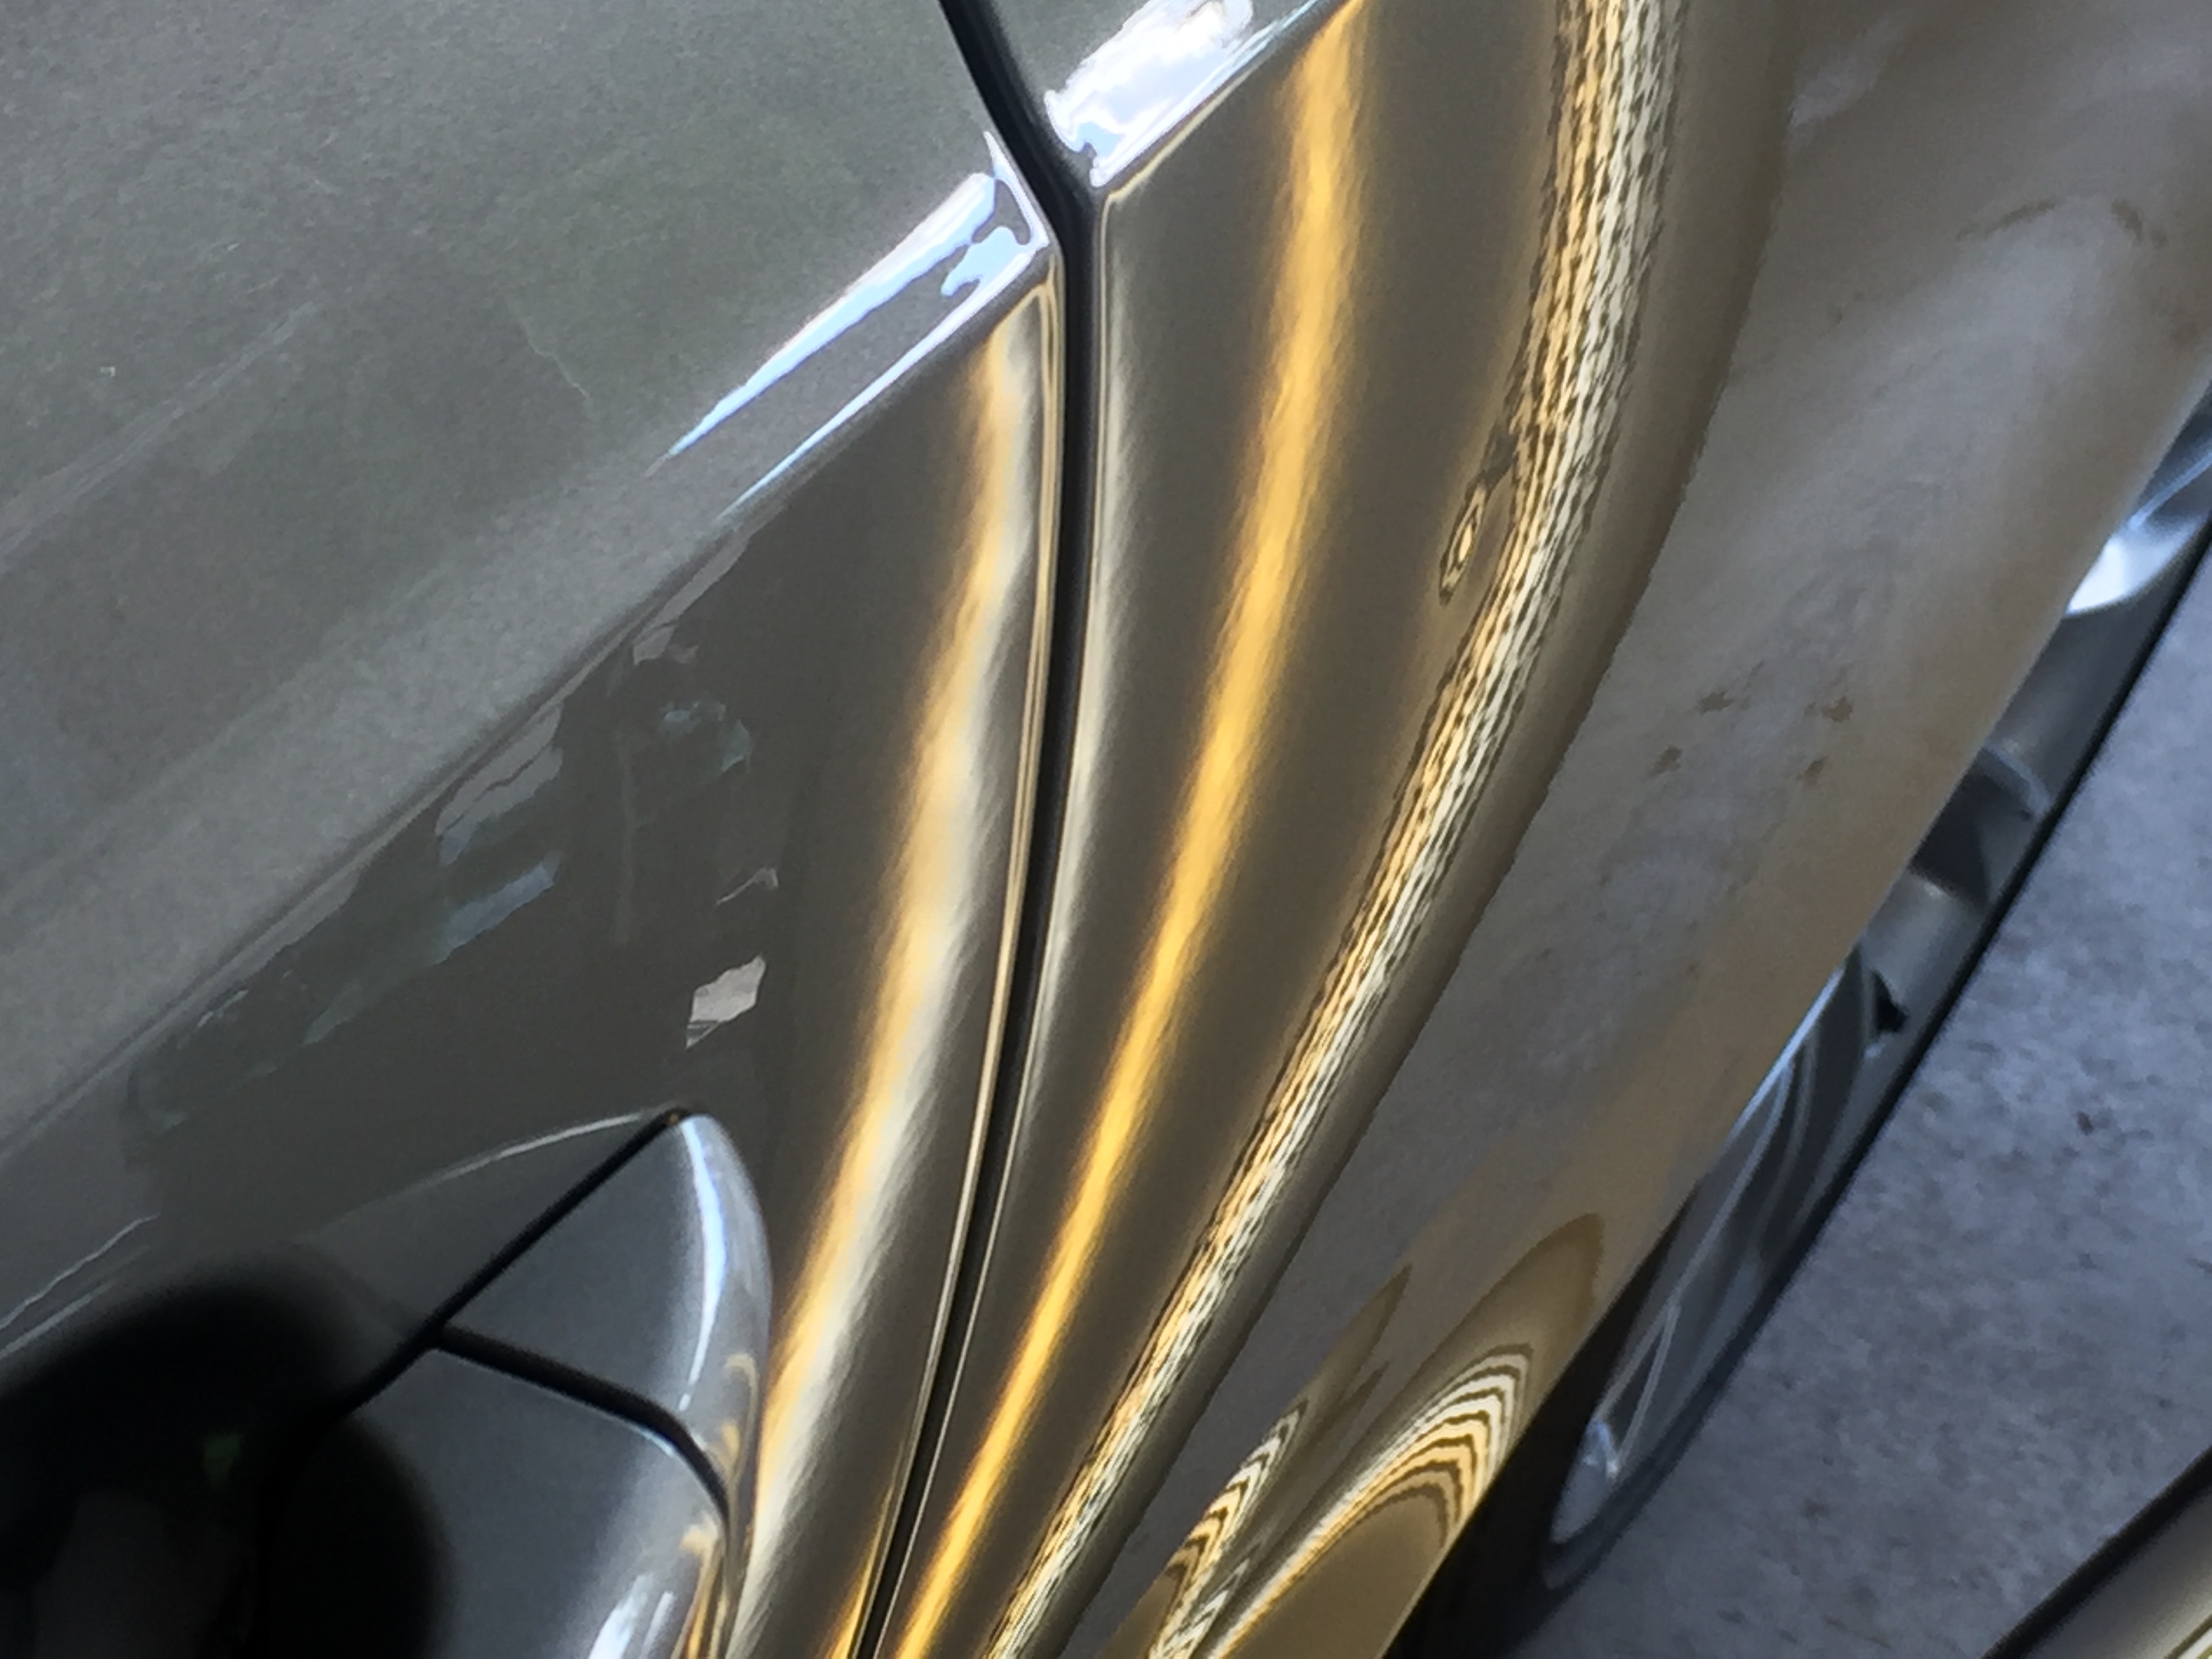 2013 Audi A5 Dent Repair on drivers rear quarter, paintless dent removal Springfield, IL http://217dent.com